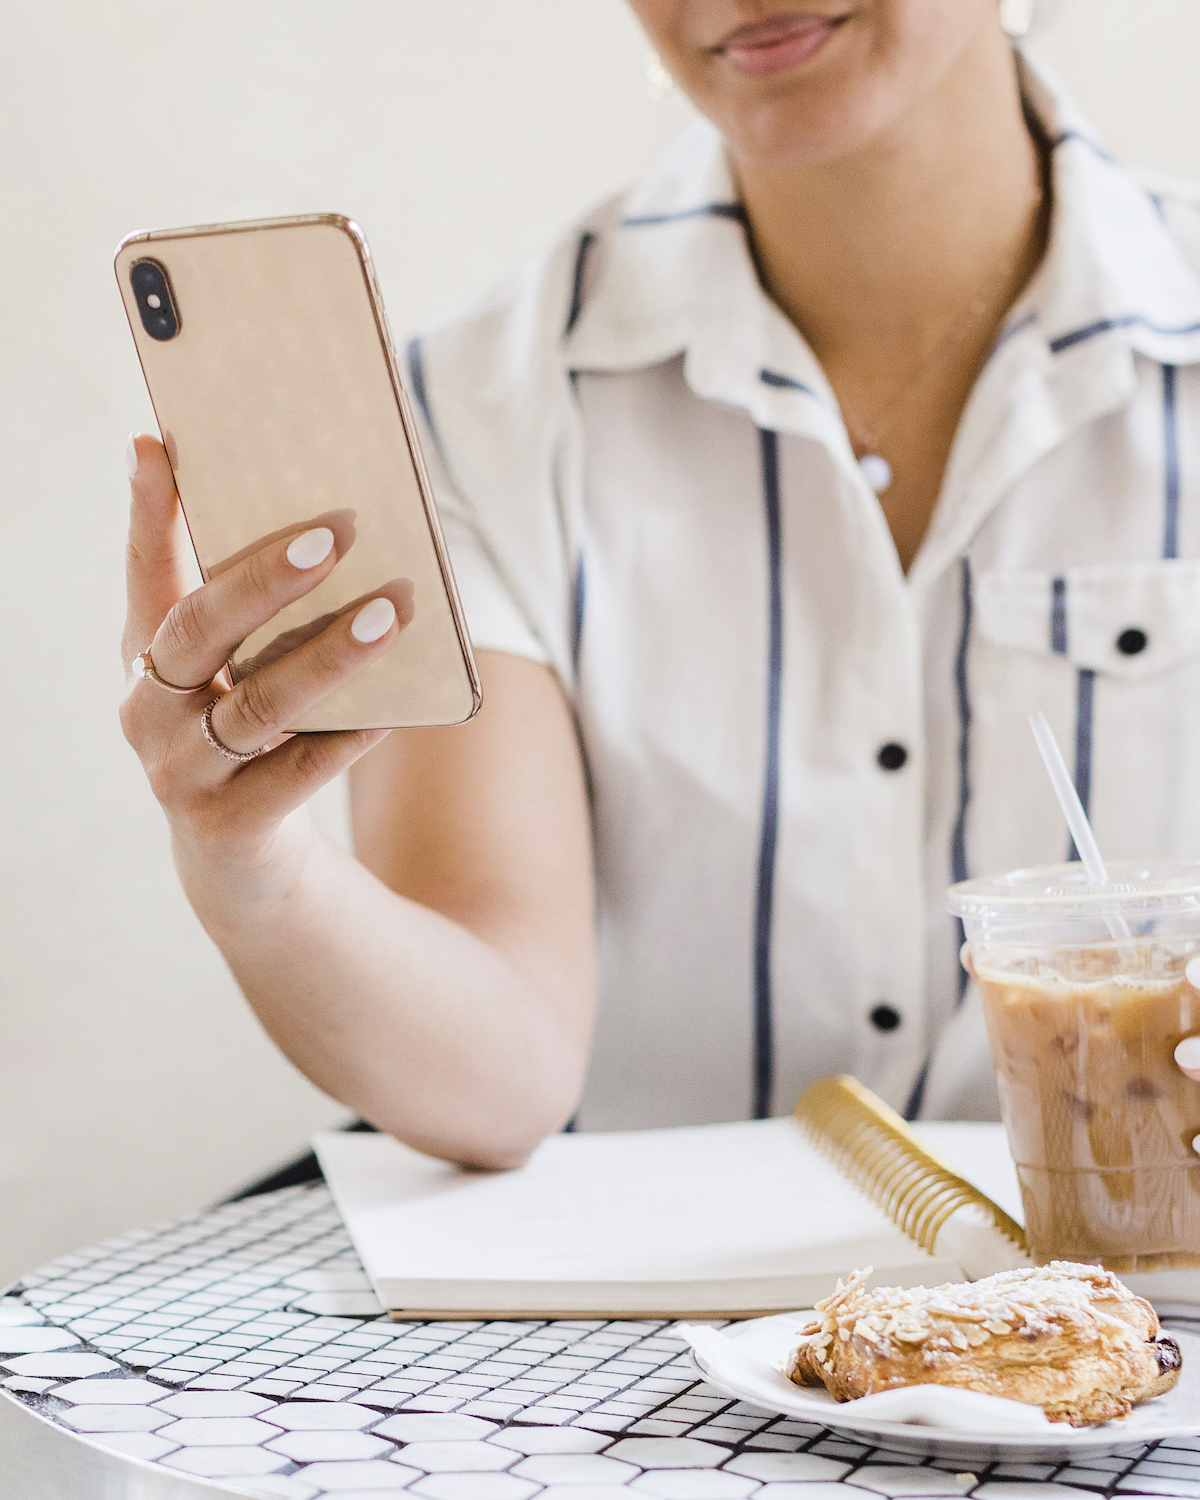 Woman at cafe working and looking at phone. Setting healthy boundaries is important for codependency treatment, perfectionism, anxiety, and more. A Florida therapist for women can help with this! Learn about healthy boundary setting here.